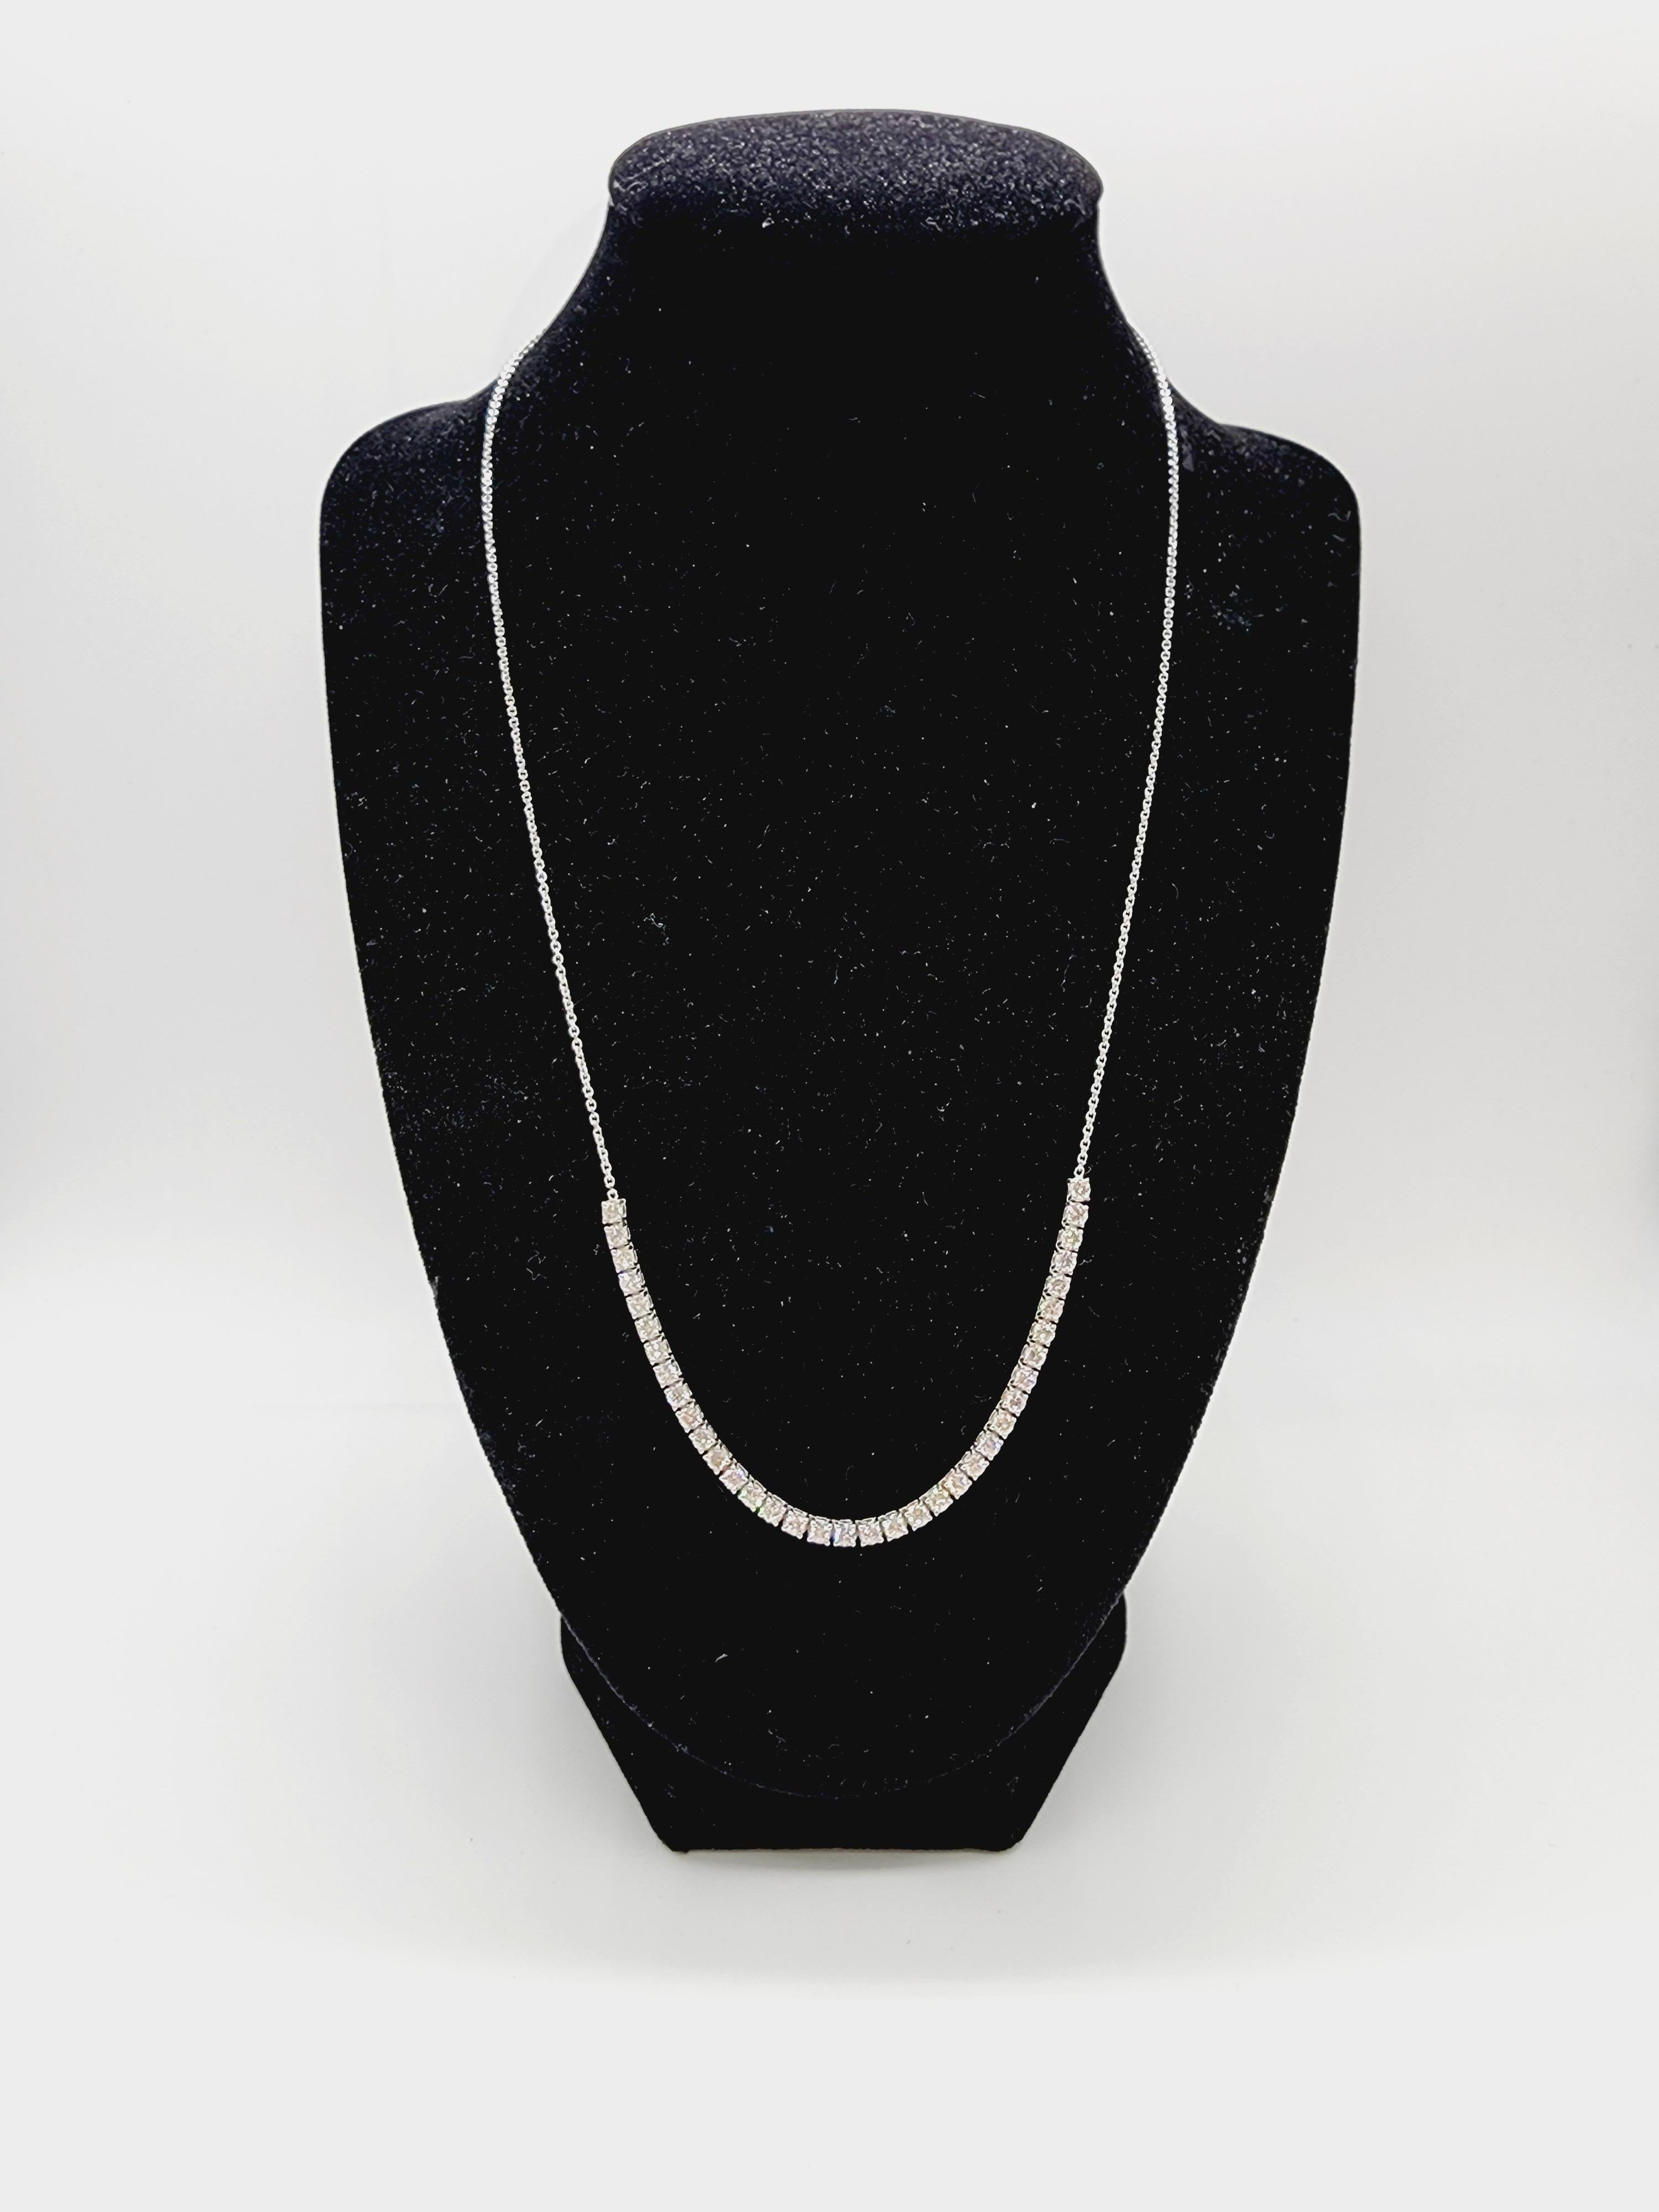 2.25 Cttw Diamond Tennis Necklace 14 Karat White Gold. Diamond link 4 inch, total chain length 20 inch, adjustable to 18 inch with the extra loop. Average Color H, Clarity VS. natural diamonds. Adorn every way.